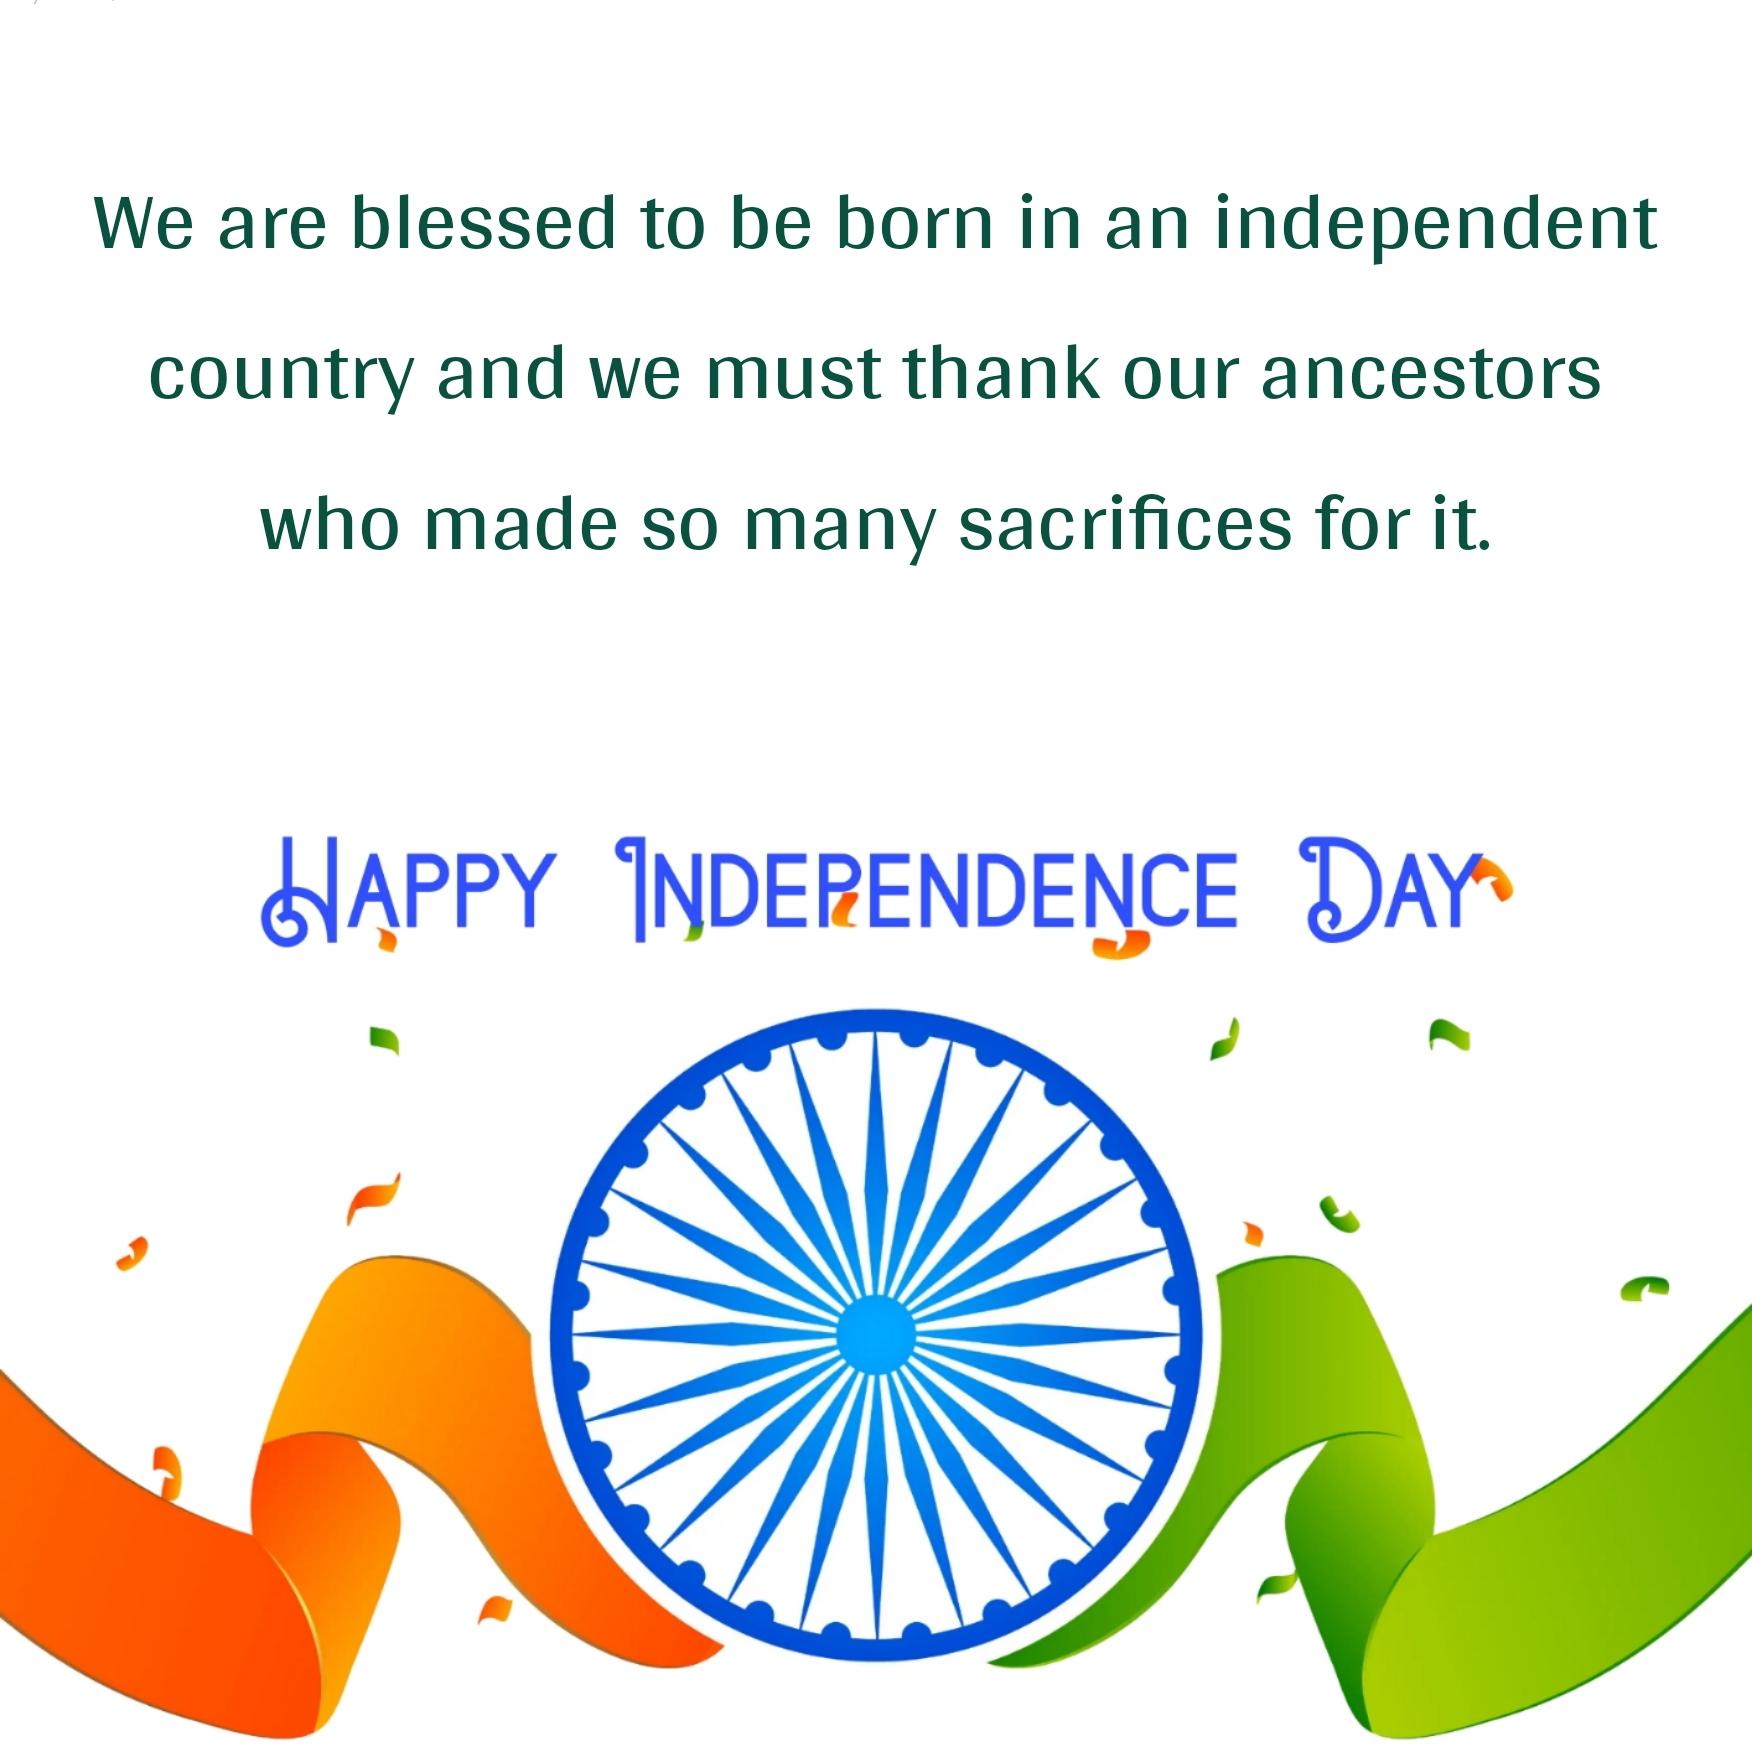 We are blessed to be born in an independent country